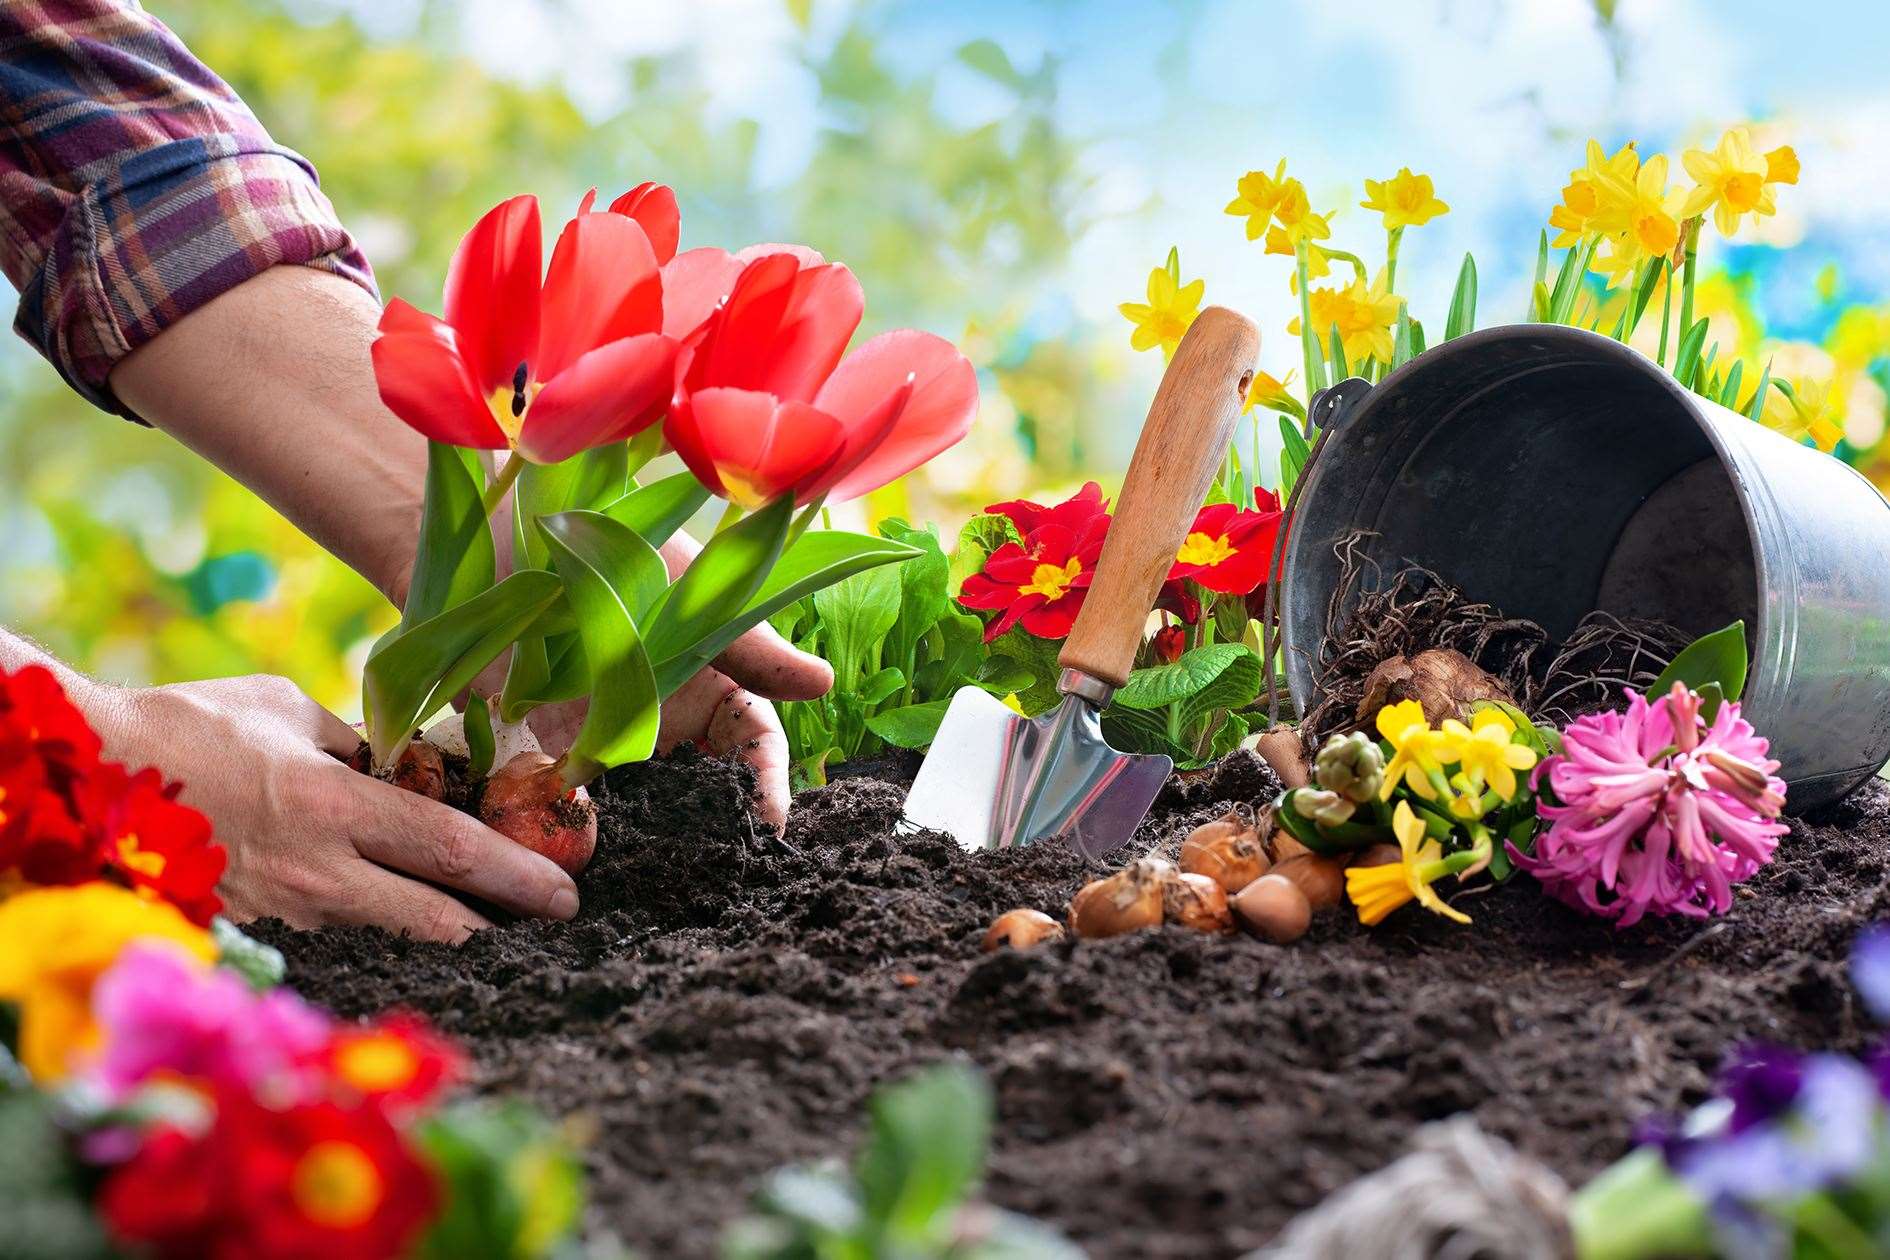 Autumn look at planting spring bulbs – find out more.